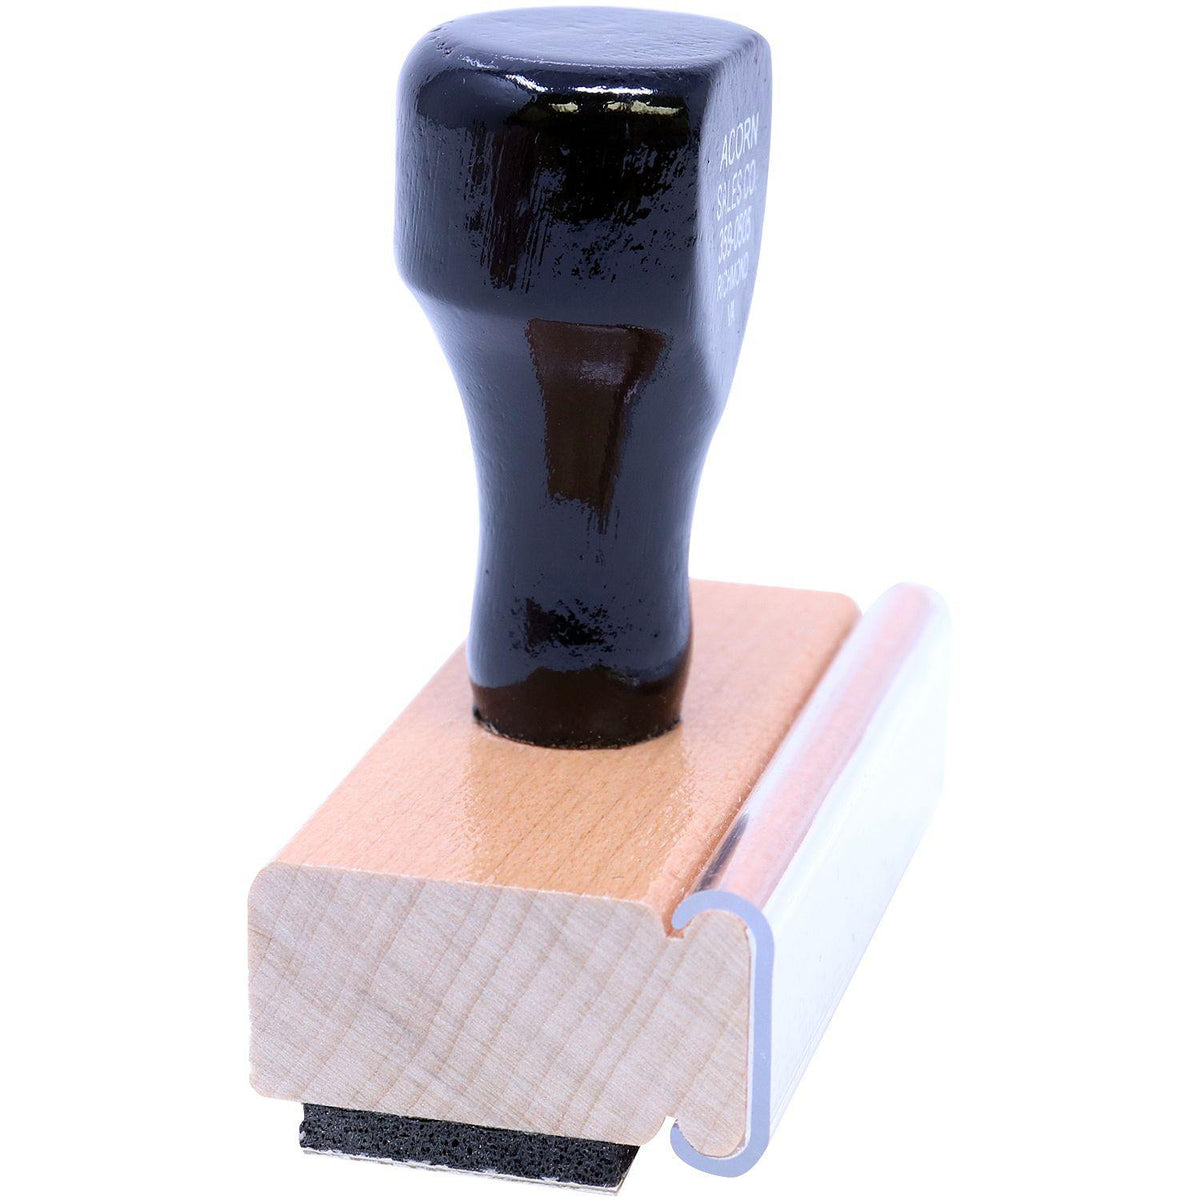 Side View of Importante Rubber Stamp at an Angle